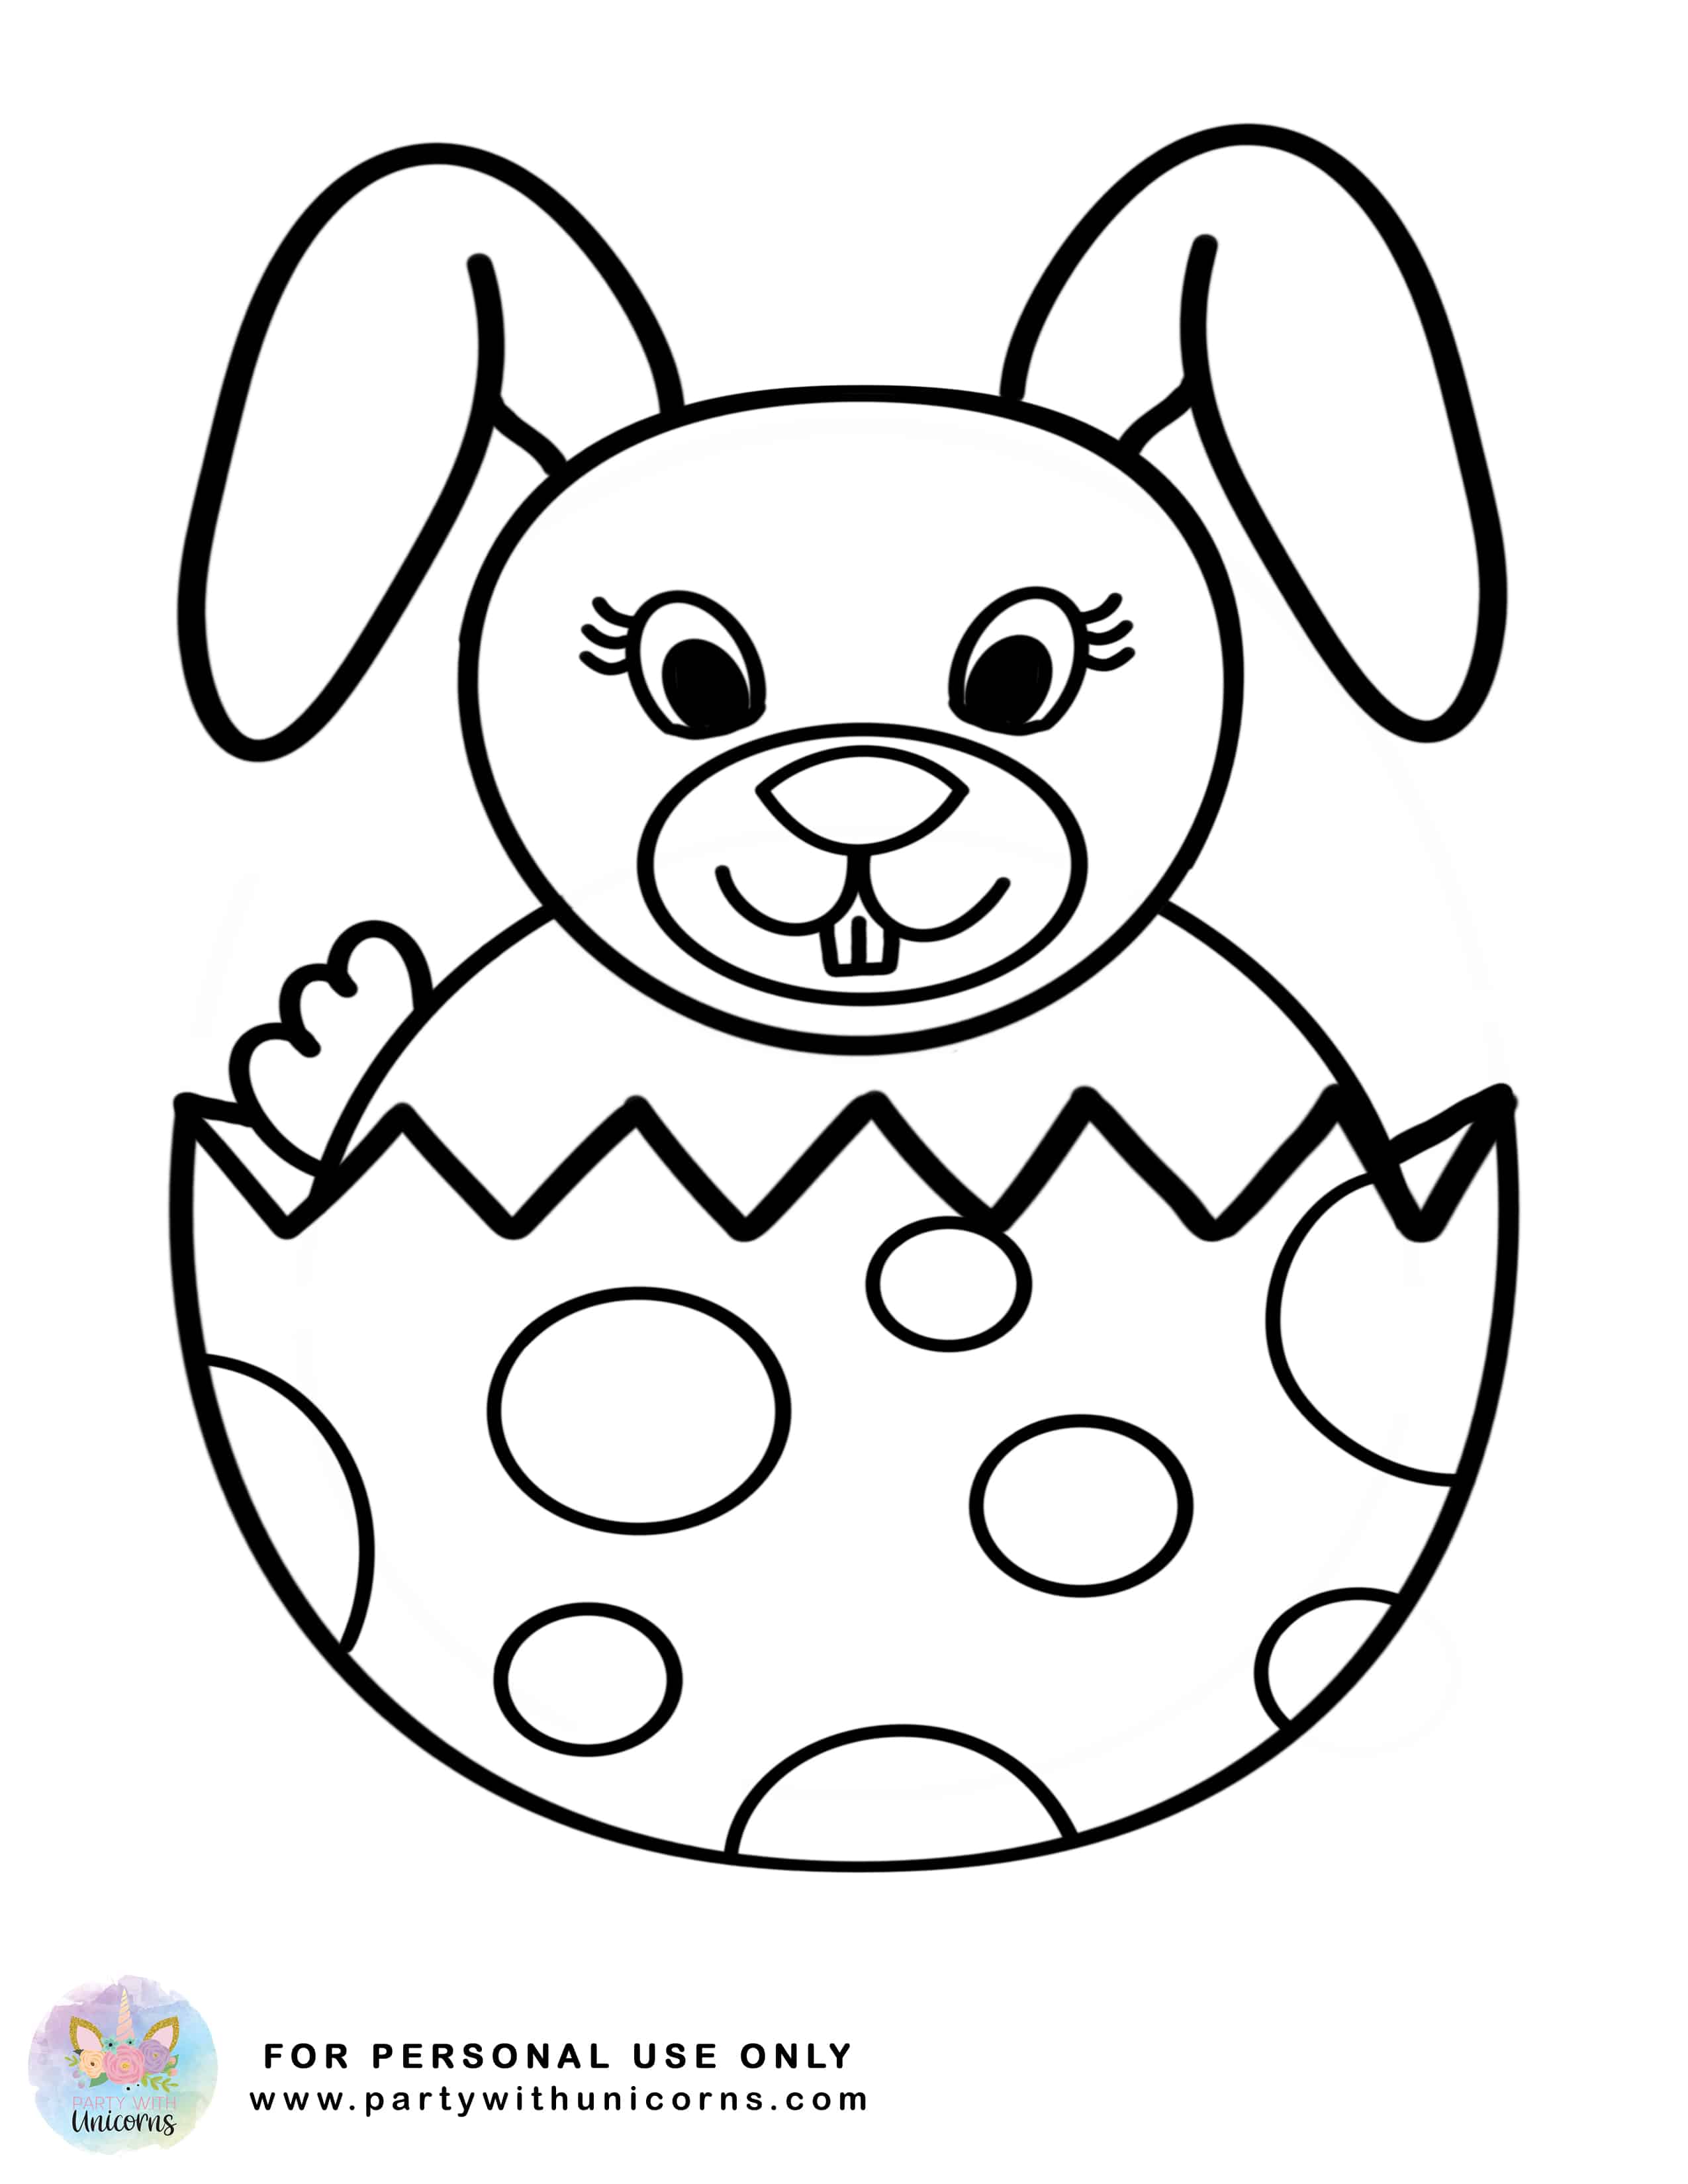 Easter Coloring Sheets   Free Download   Party with Unicorns